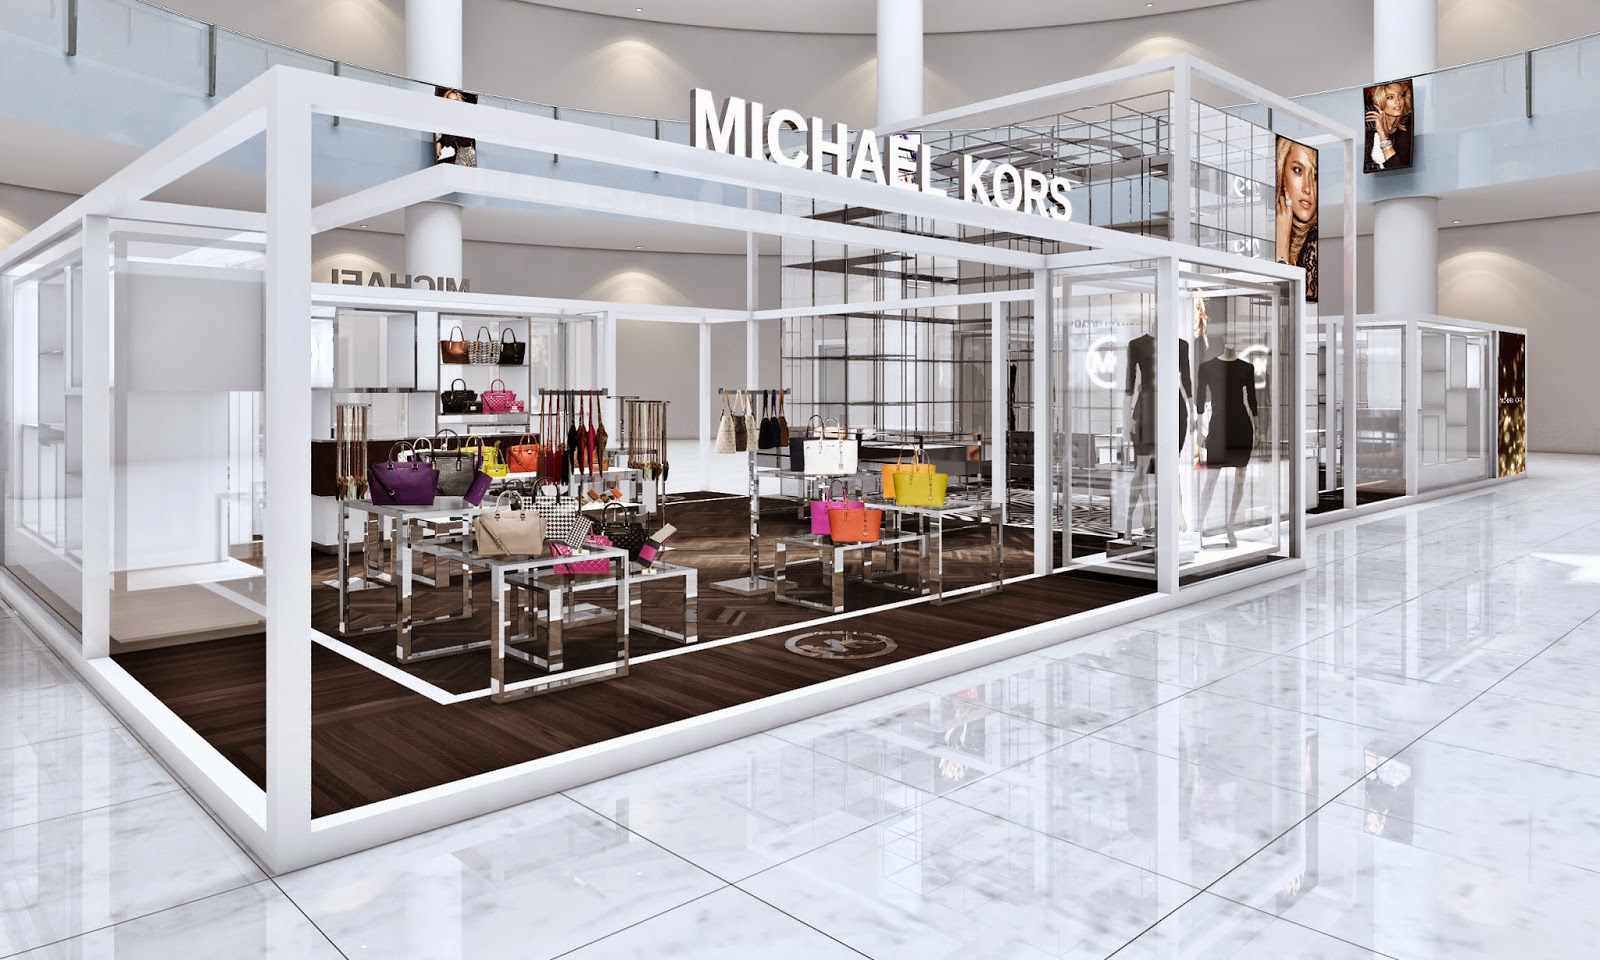 MICHAEL KORS TO OPEN SELMA-CENTRIC POP-UP SHOP IN DUBAI | The Vanity